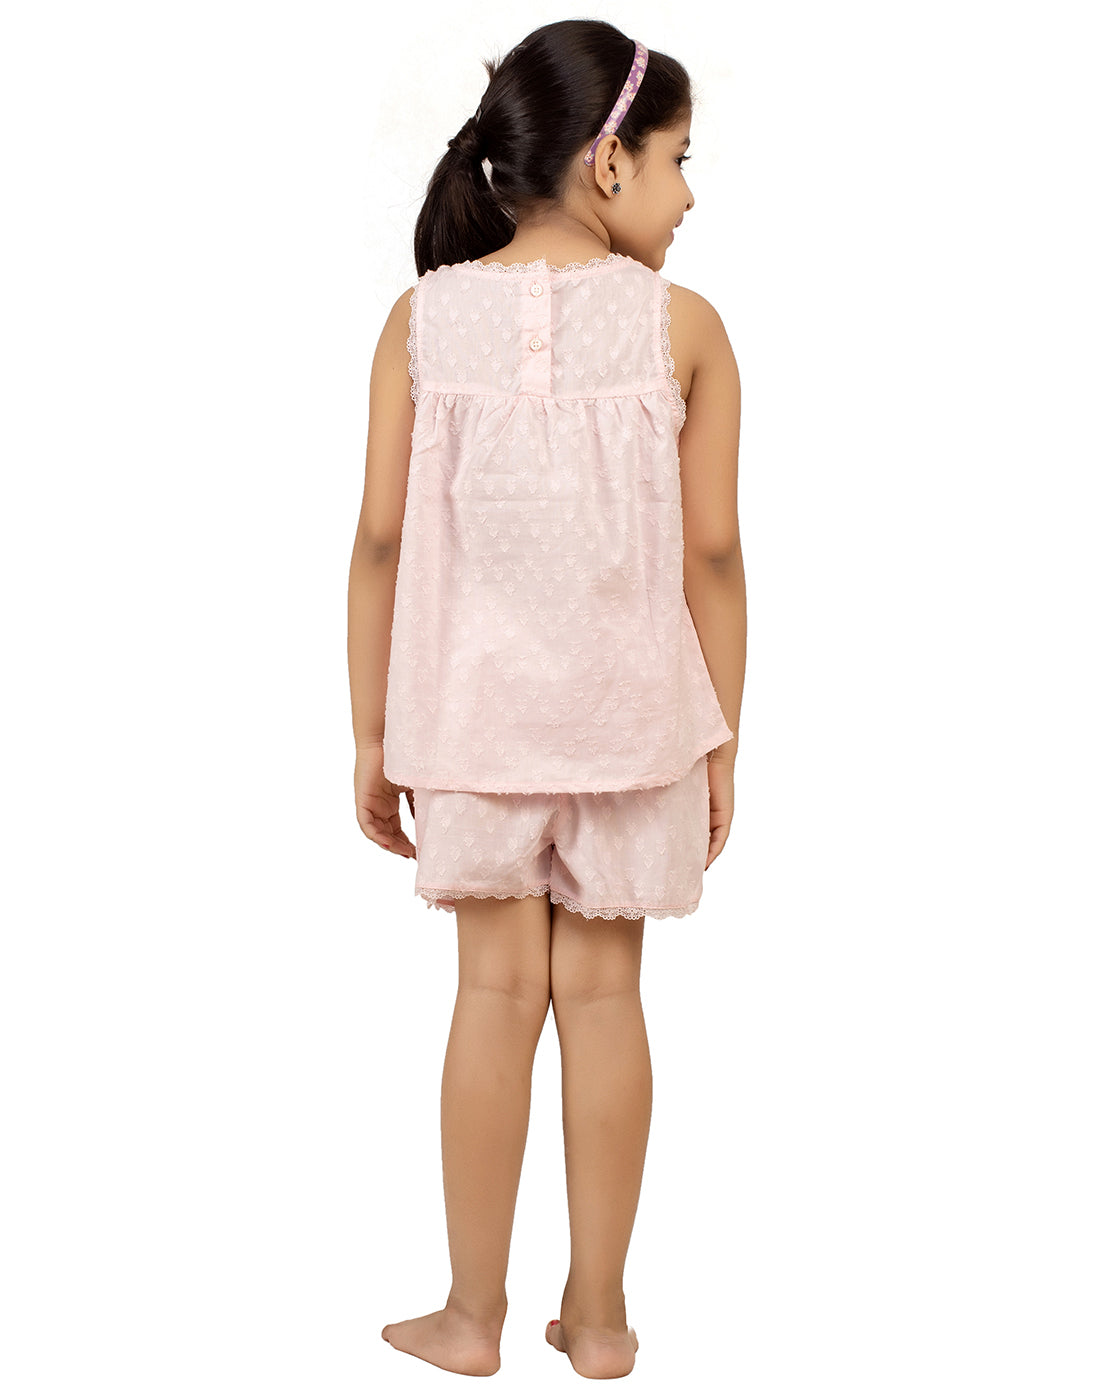 Night Suit Shorty Set for Girls-Pink Heart